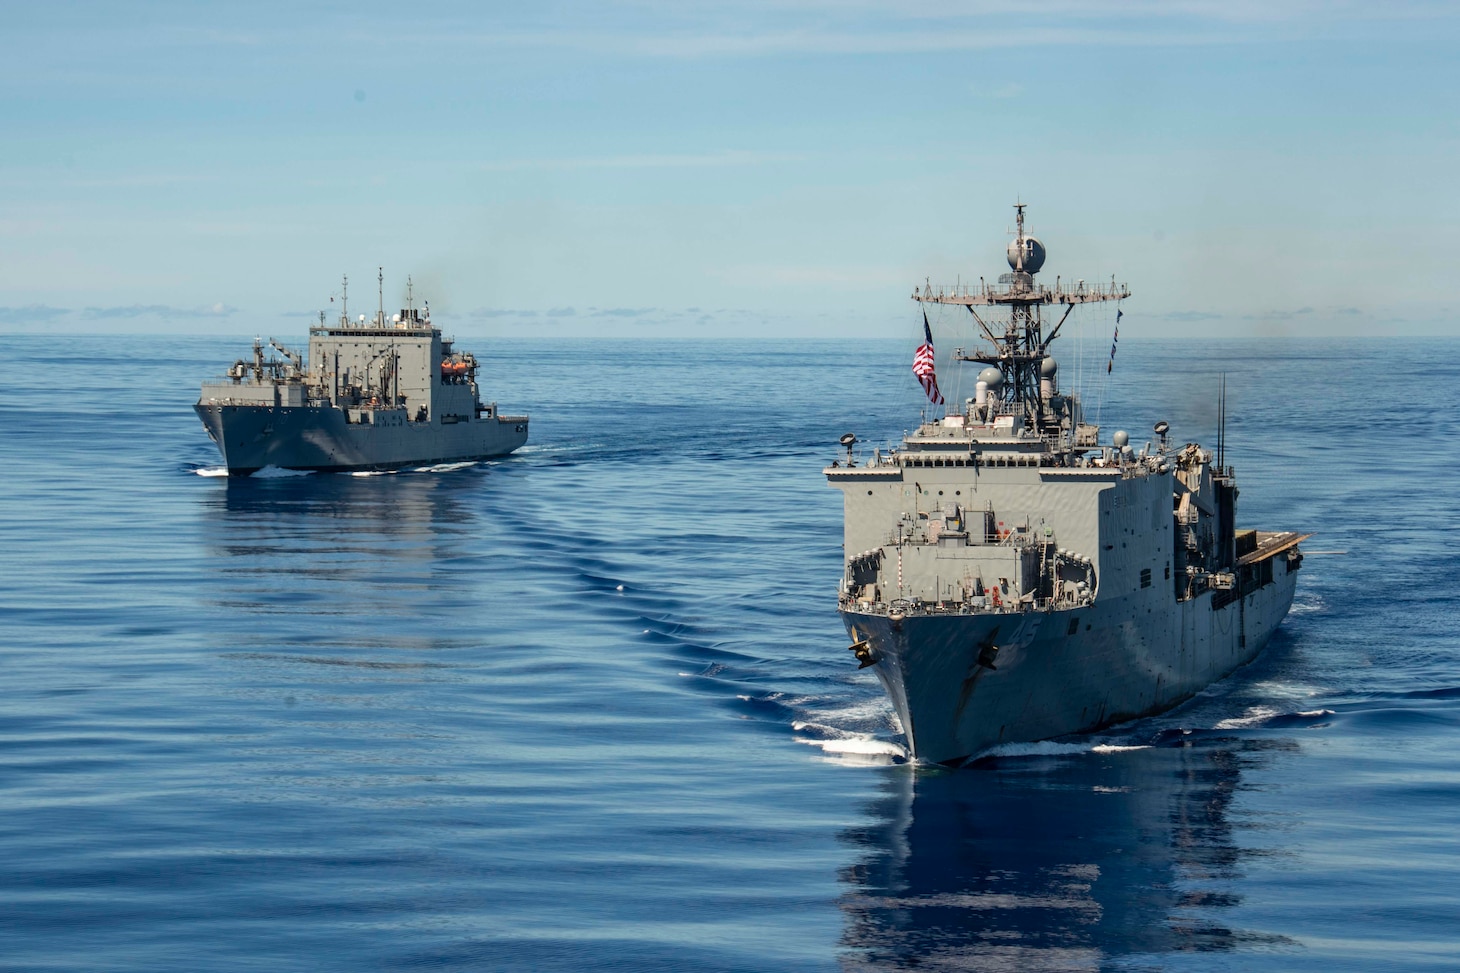 PHILIPPINE SEA (Sept. 25, 2020) USS Comstock (LSD 45), right, and USNS Charles Drew (T-AKE 10) steam in formation with the Navy’s only forward-deployed aircraft carrier USS Ronald Reagan (CVN 76), in support of Valiant Shield 2020. Valiant Shield is a U.S. only, biennial field training exercise (FTX) with a focus on integration of joint training in a blue-water environment among U.S. forces. This training enables real-world proficiency in sustaining joint forces through detecting, locating, tracking and engaging units at sea, in the air, on land and in cyberspace in response to a range of mission areas. (U.S. Navy video by Mass Communication Specialist 2nd Class Erica Bechard)